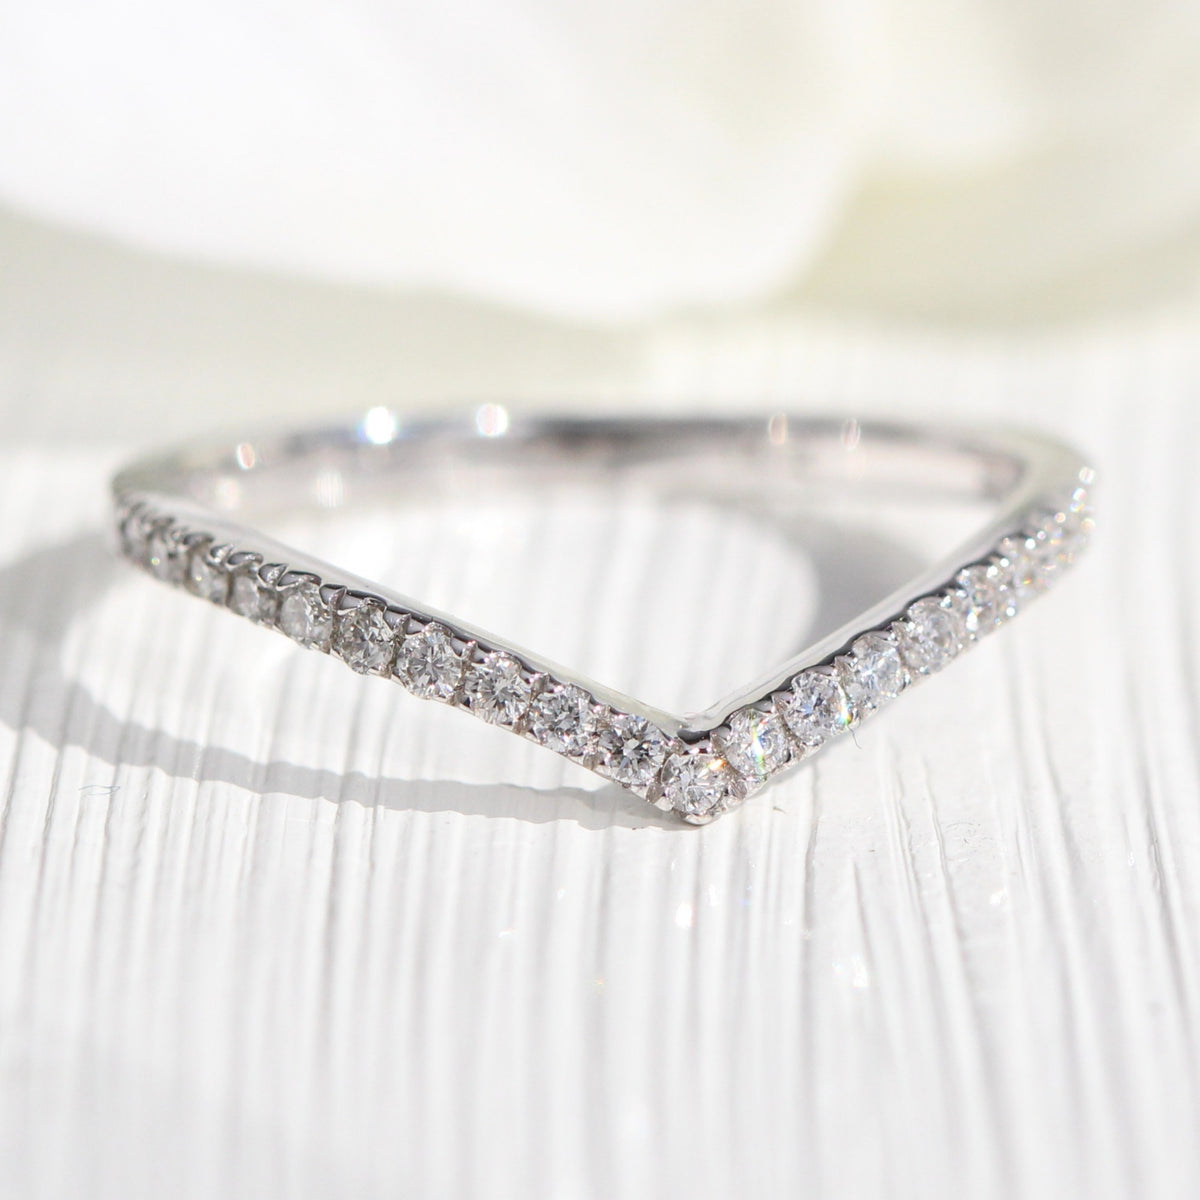 Chevron Diamond Wedding Ring White Gold Curved Band by la more design jewelry